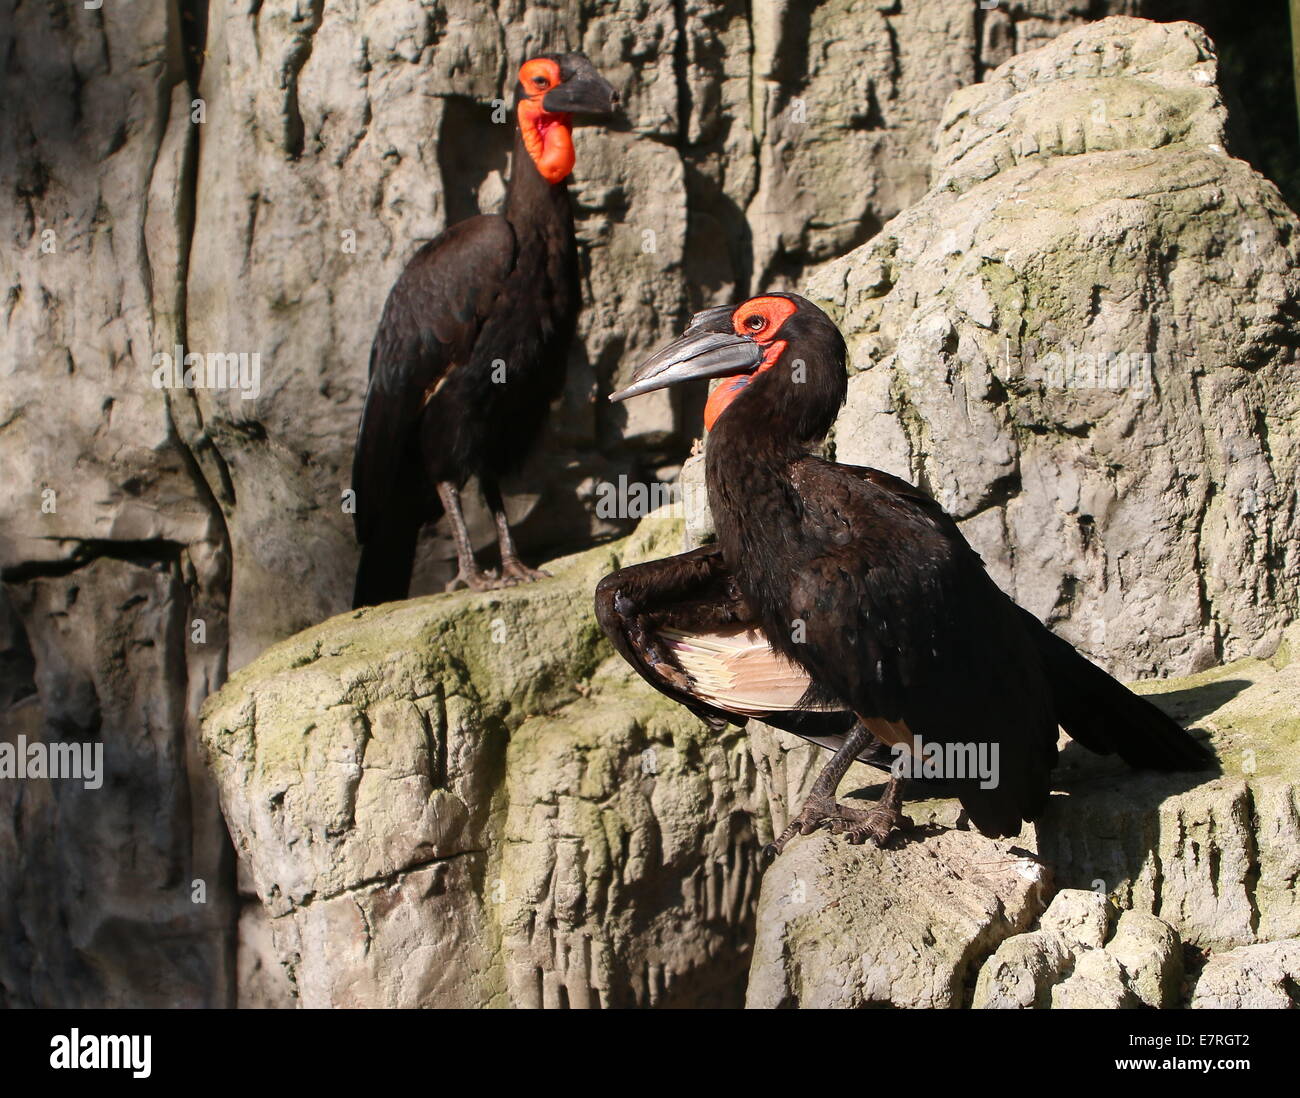 Two Southern ground hornbills (Bucorvus leadbeateri, formerly B. Cafer) posing on rocks at Ouwehands Zoo, Rhenen The Netherlands Stock Photo